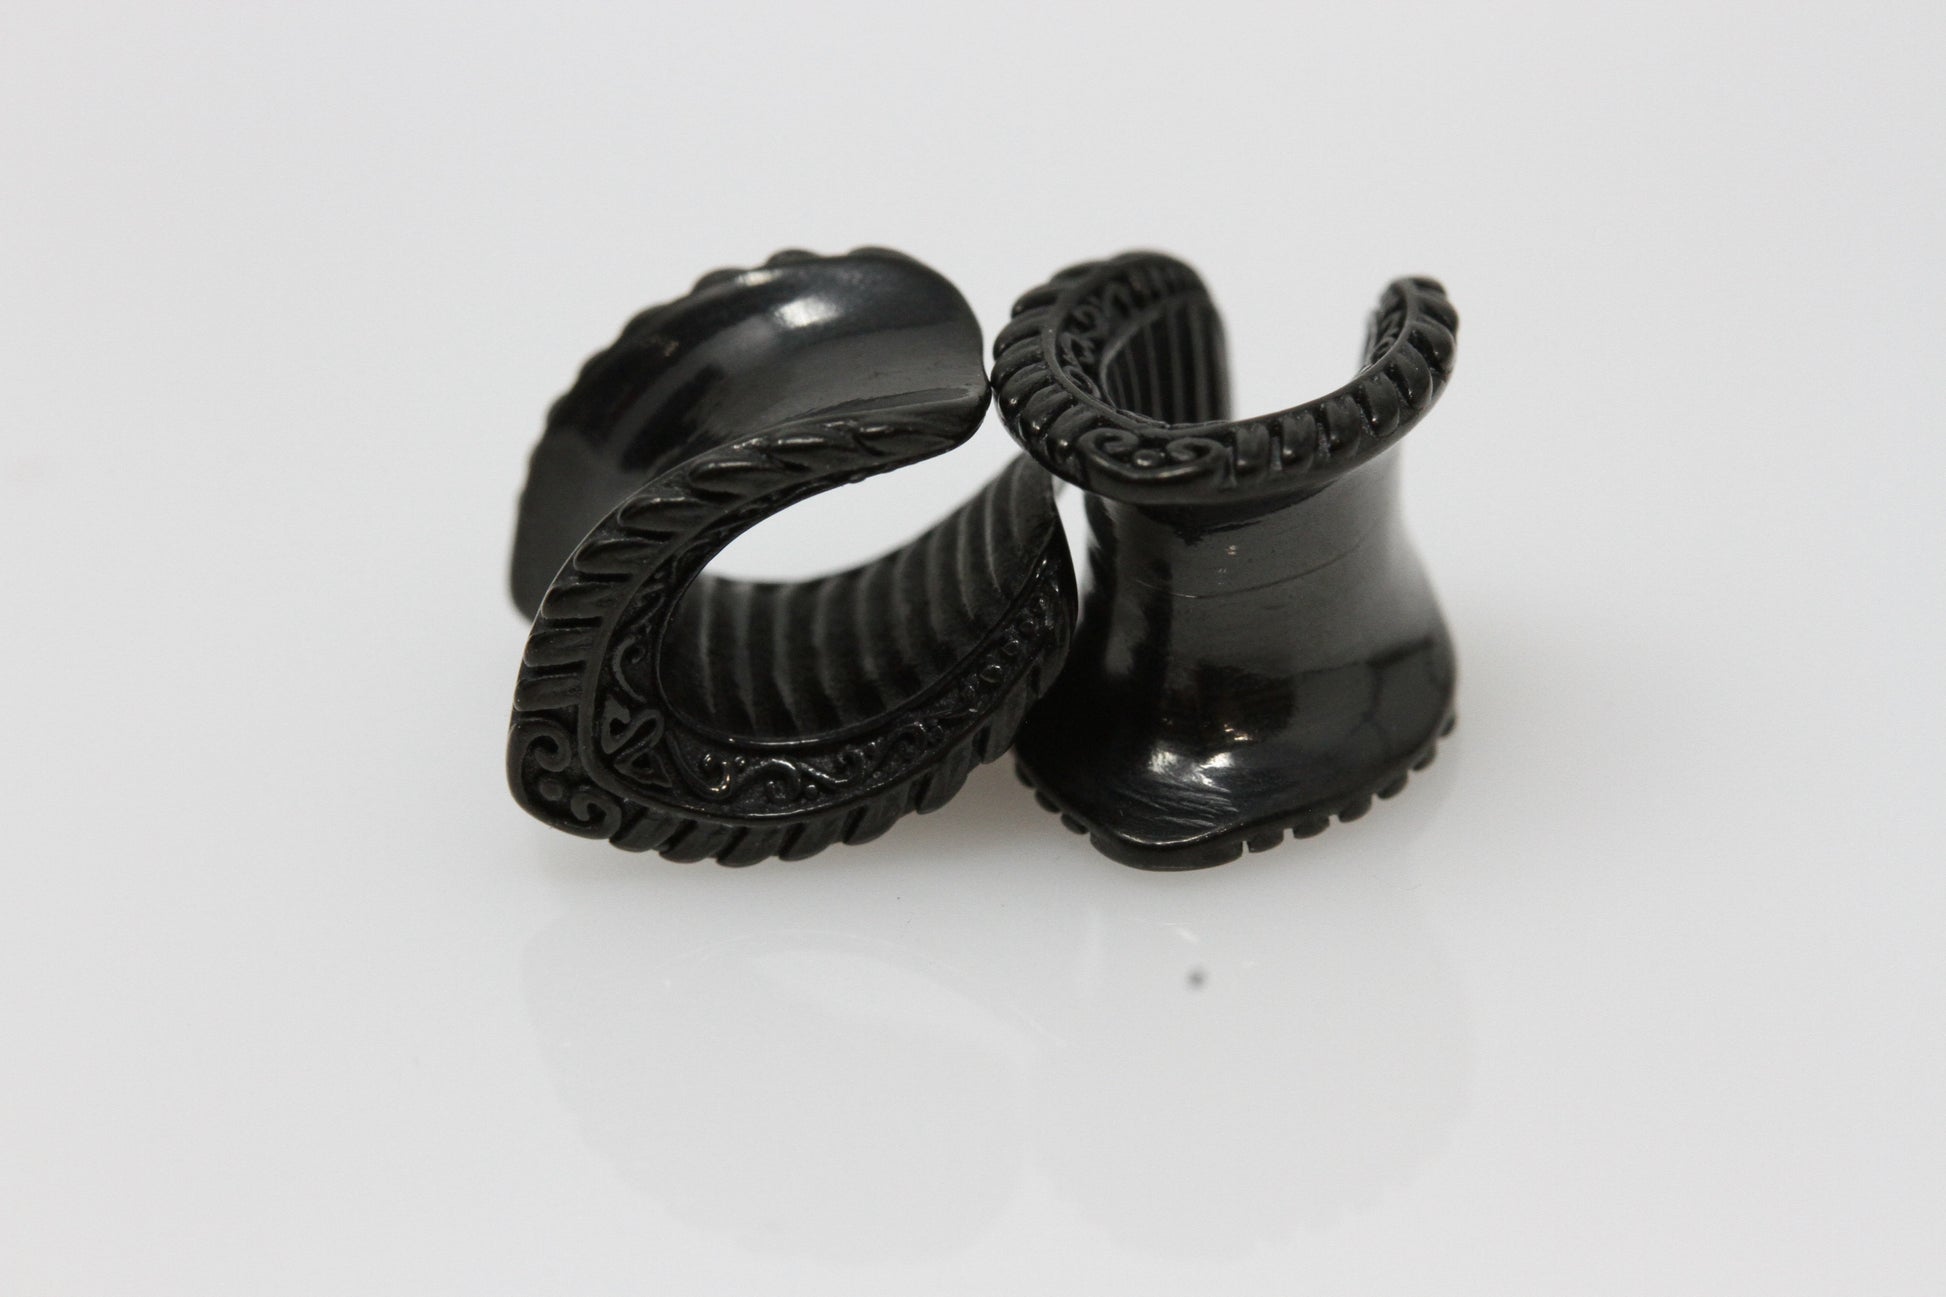 Saddles for stretched ears